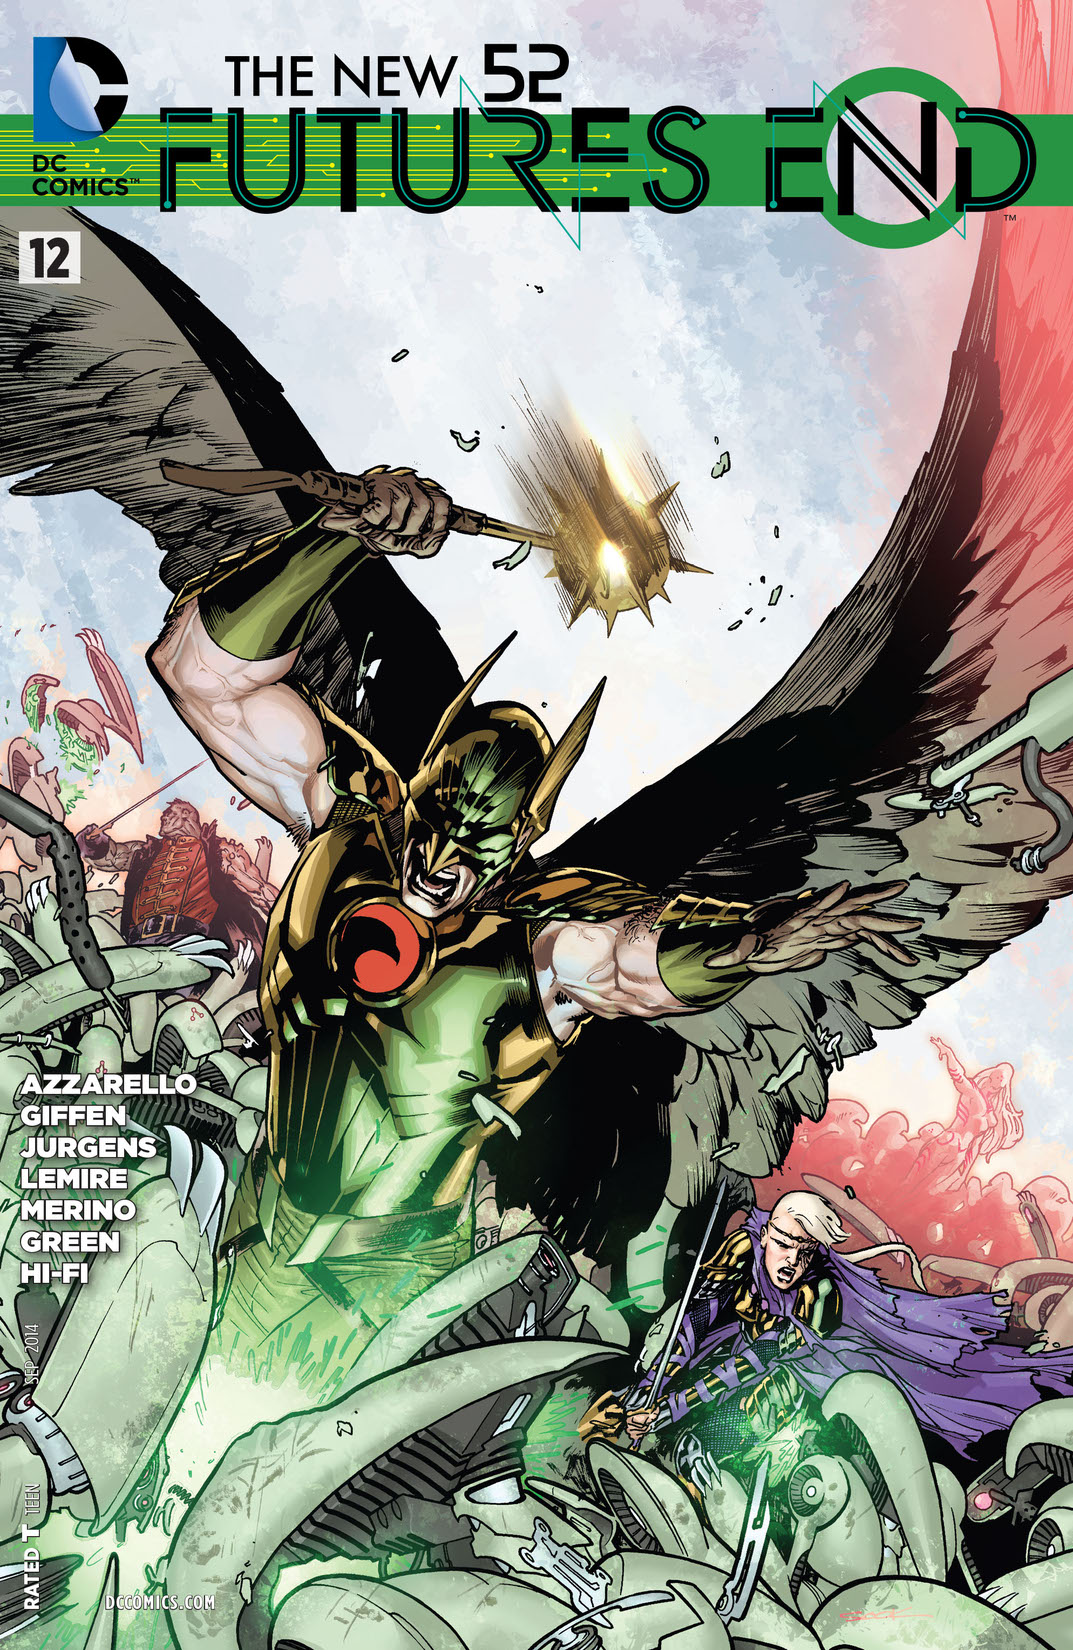 The New 52: Futures End #12 preview images